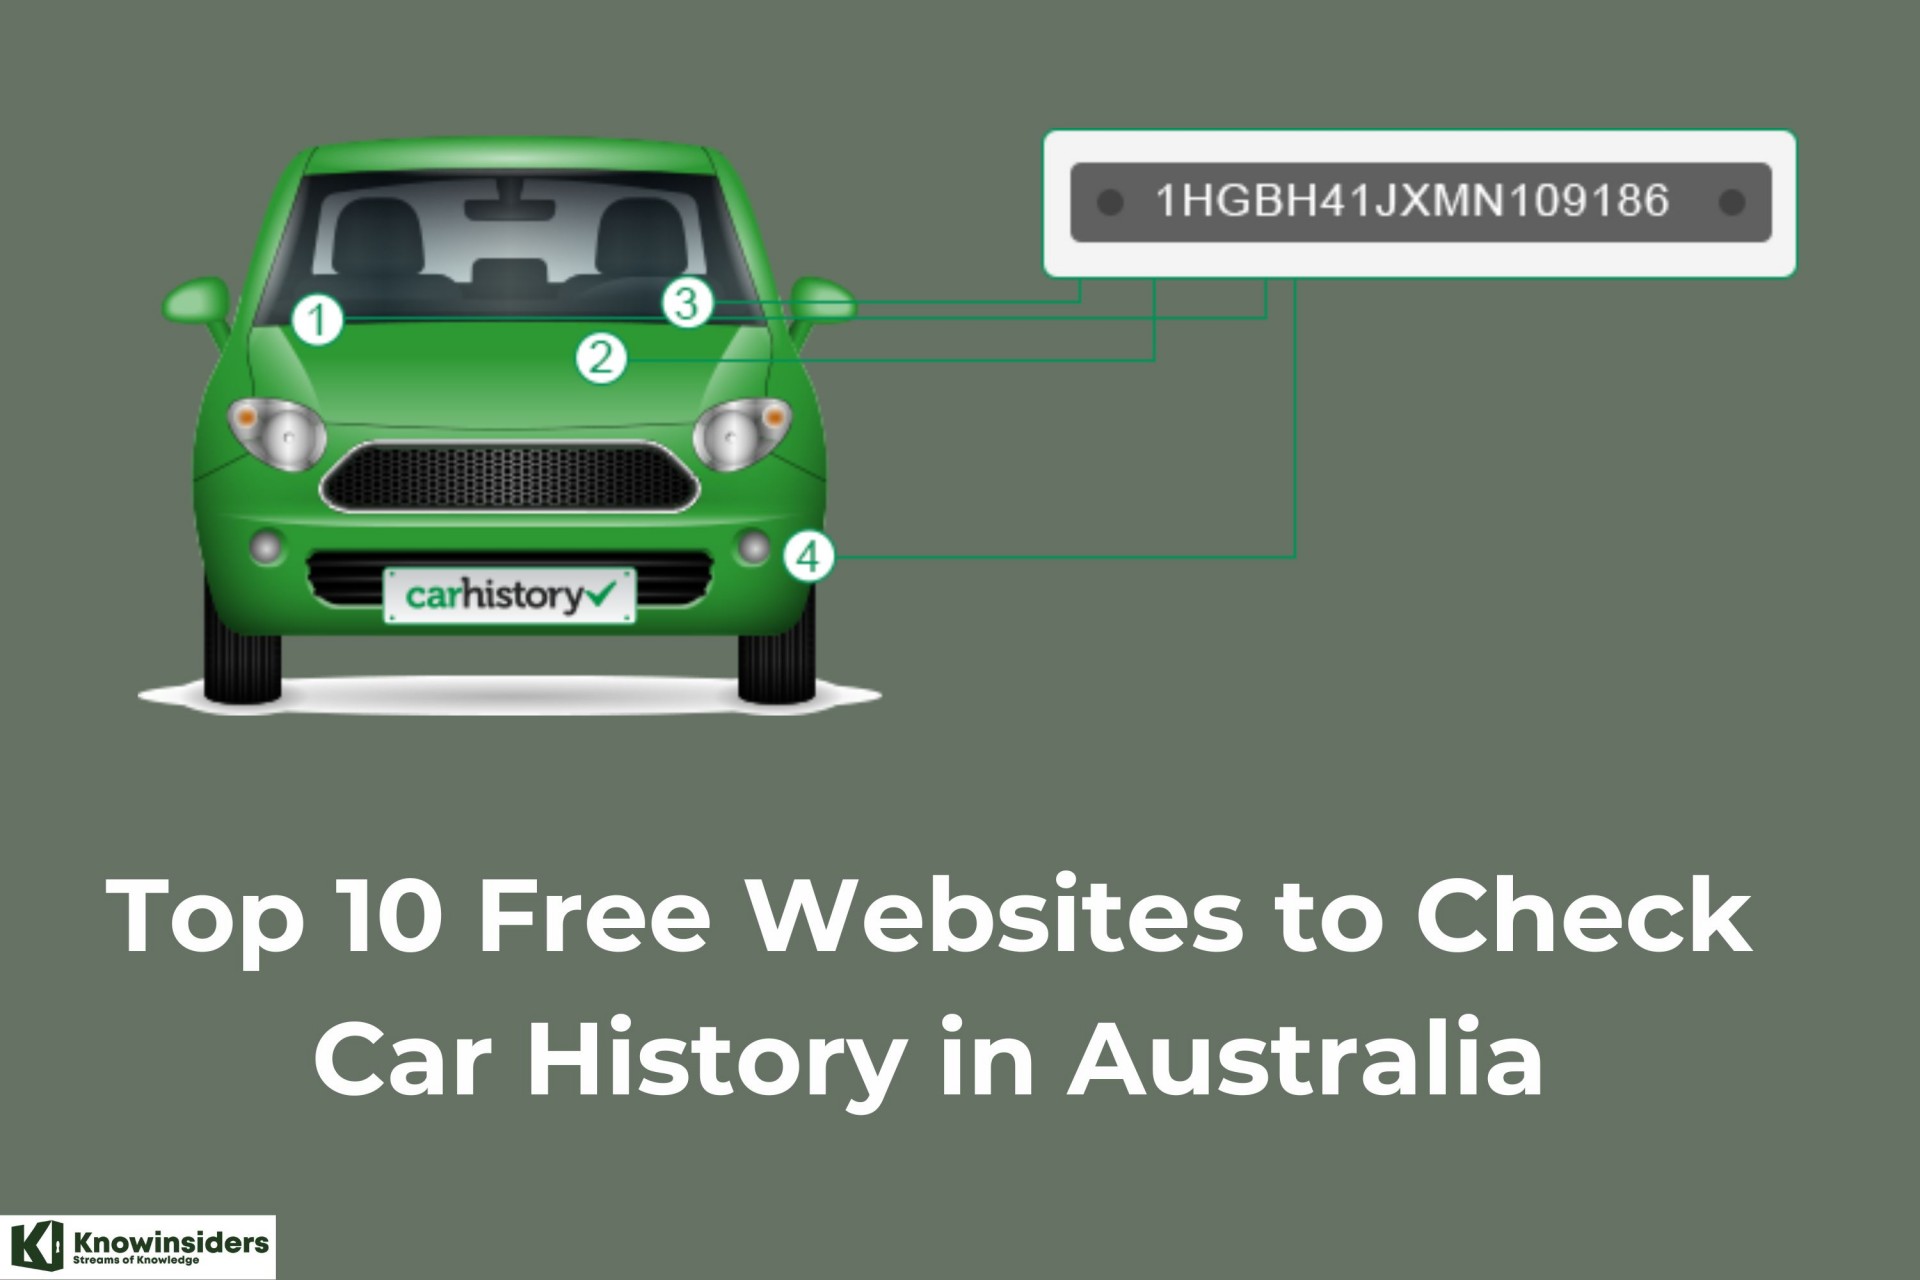 Top 10 Free Websites to Check Car History in Australia